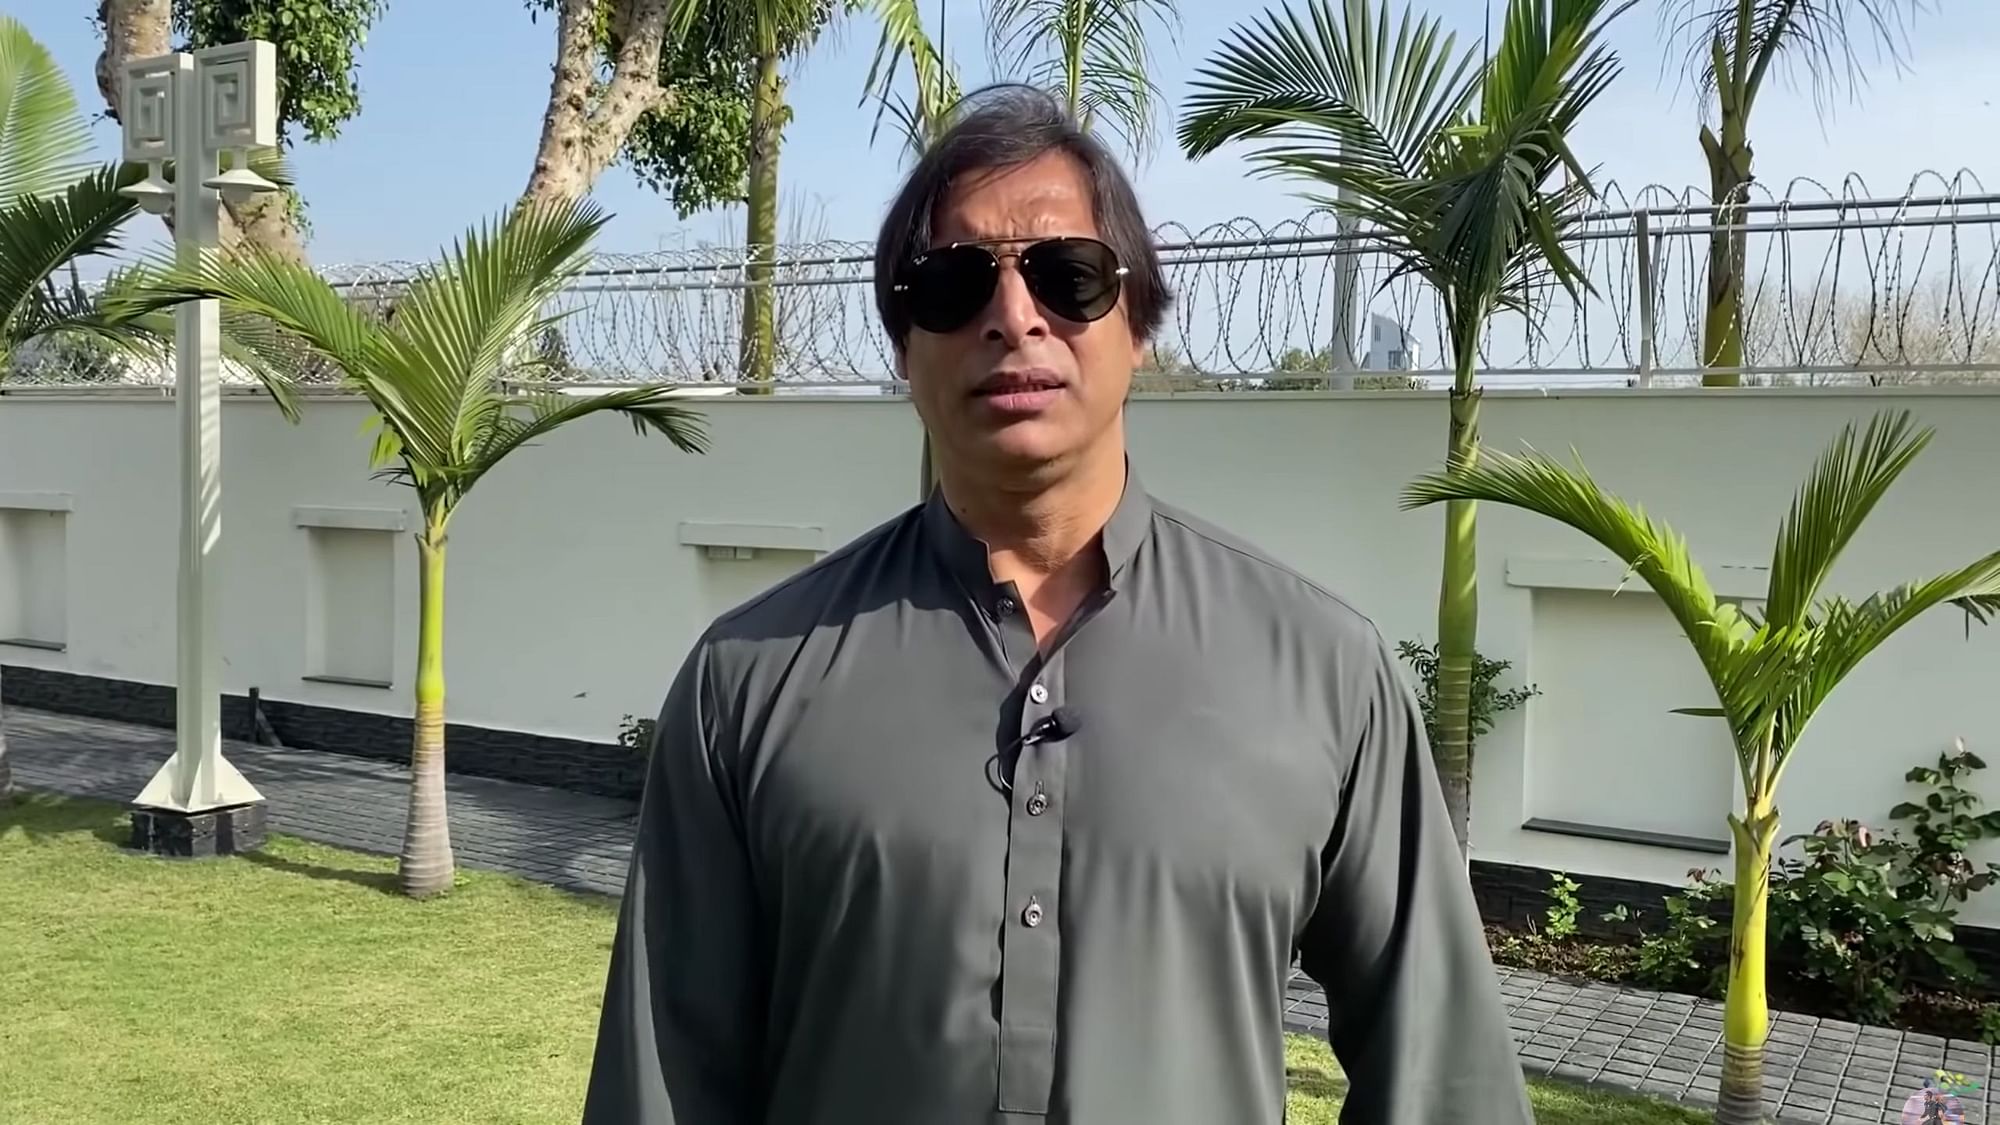 Shoaib Akhtar has said that he would love to take up an offer to coach the Indian fast bowlers.